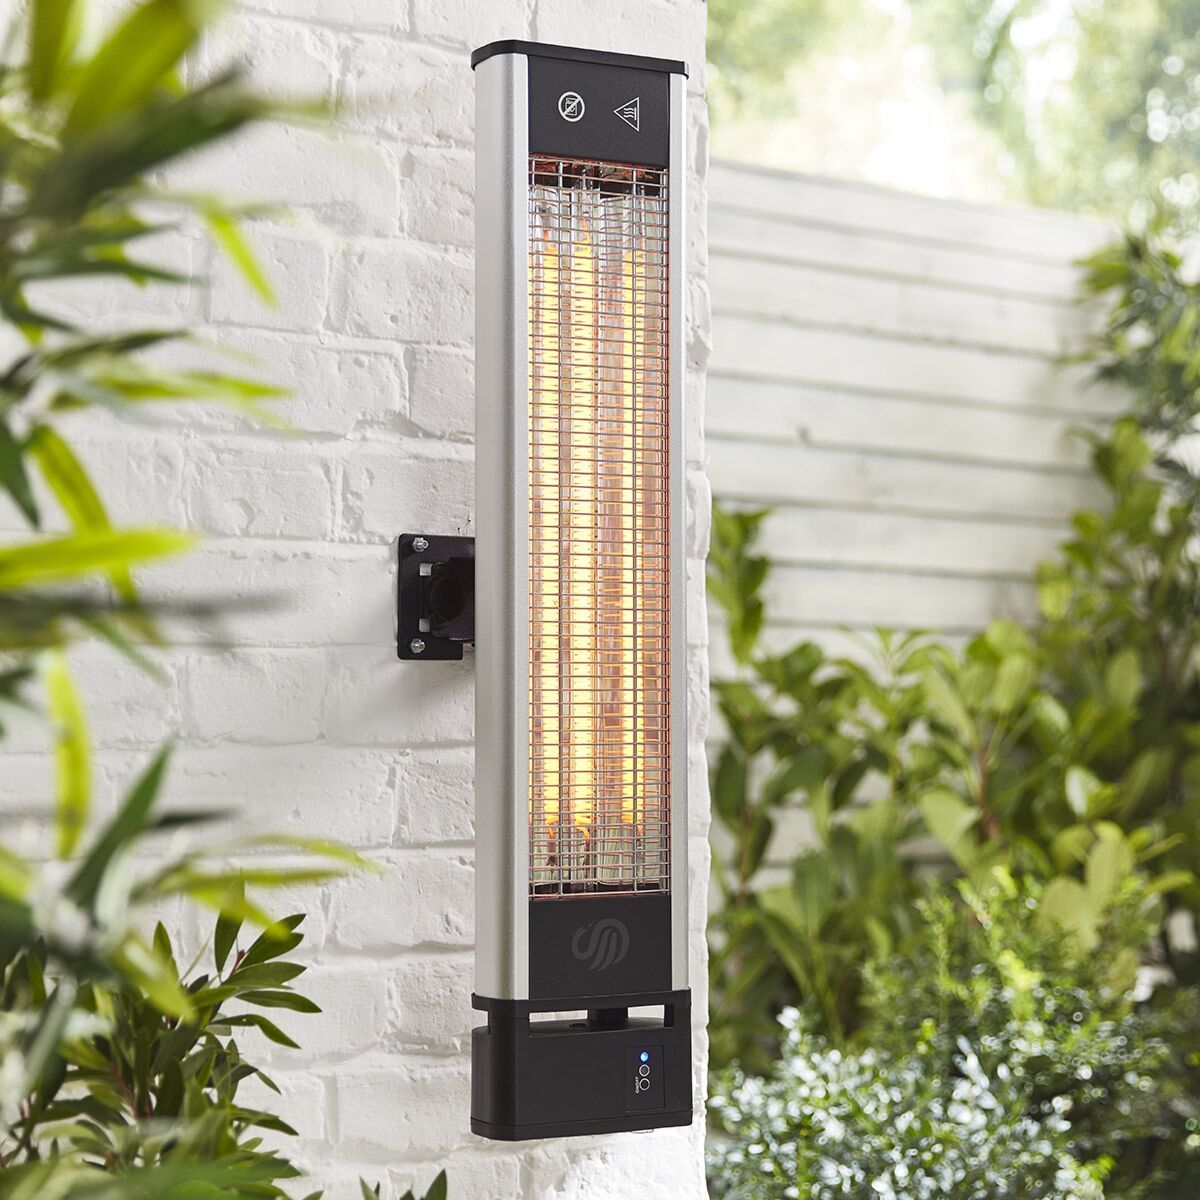 Best Patio Heaters To In The Uk For 2021 - 2kw Quartz Wall Mounted Outdoor Electric Garden Patio Heater